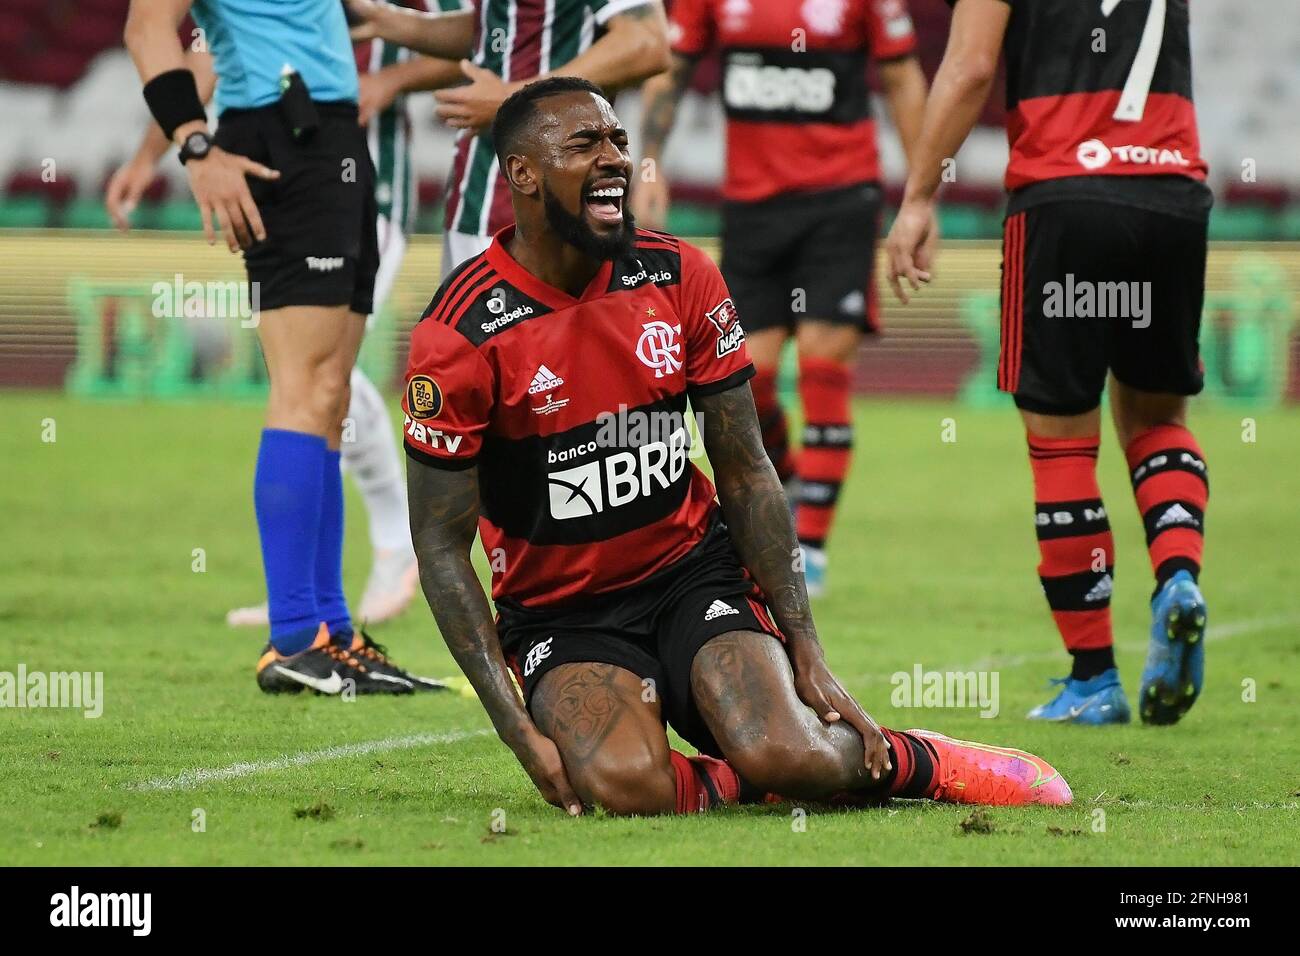 Rio de Janeiro, Brazil, July 1, 2020. Football player Gerson from the Flamengo team during the Flamengo x Fluminense game for the Carioca championship. Stock Photo